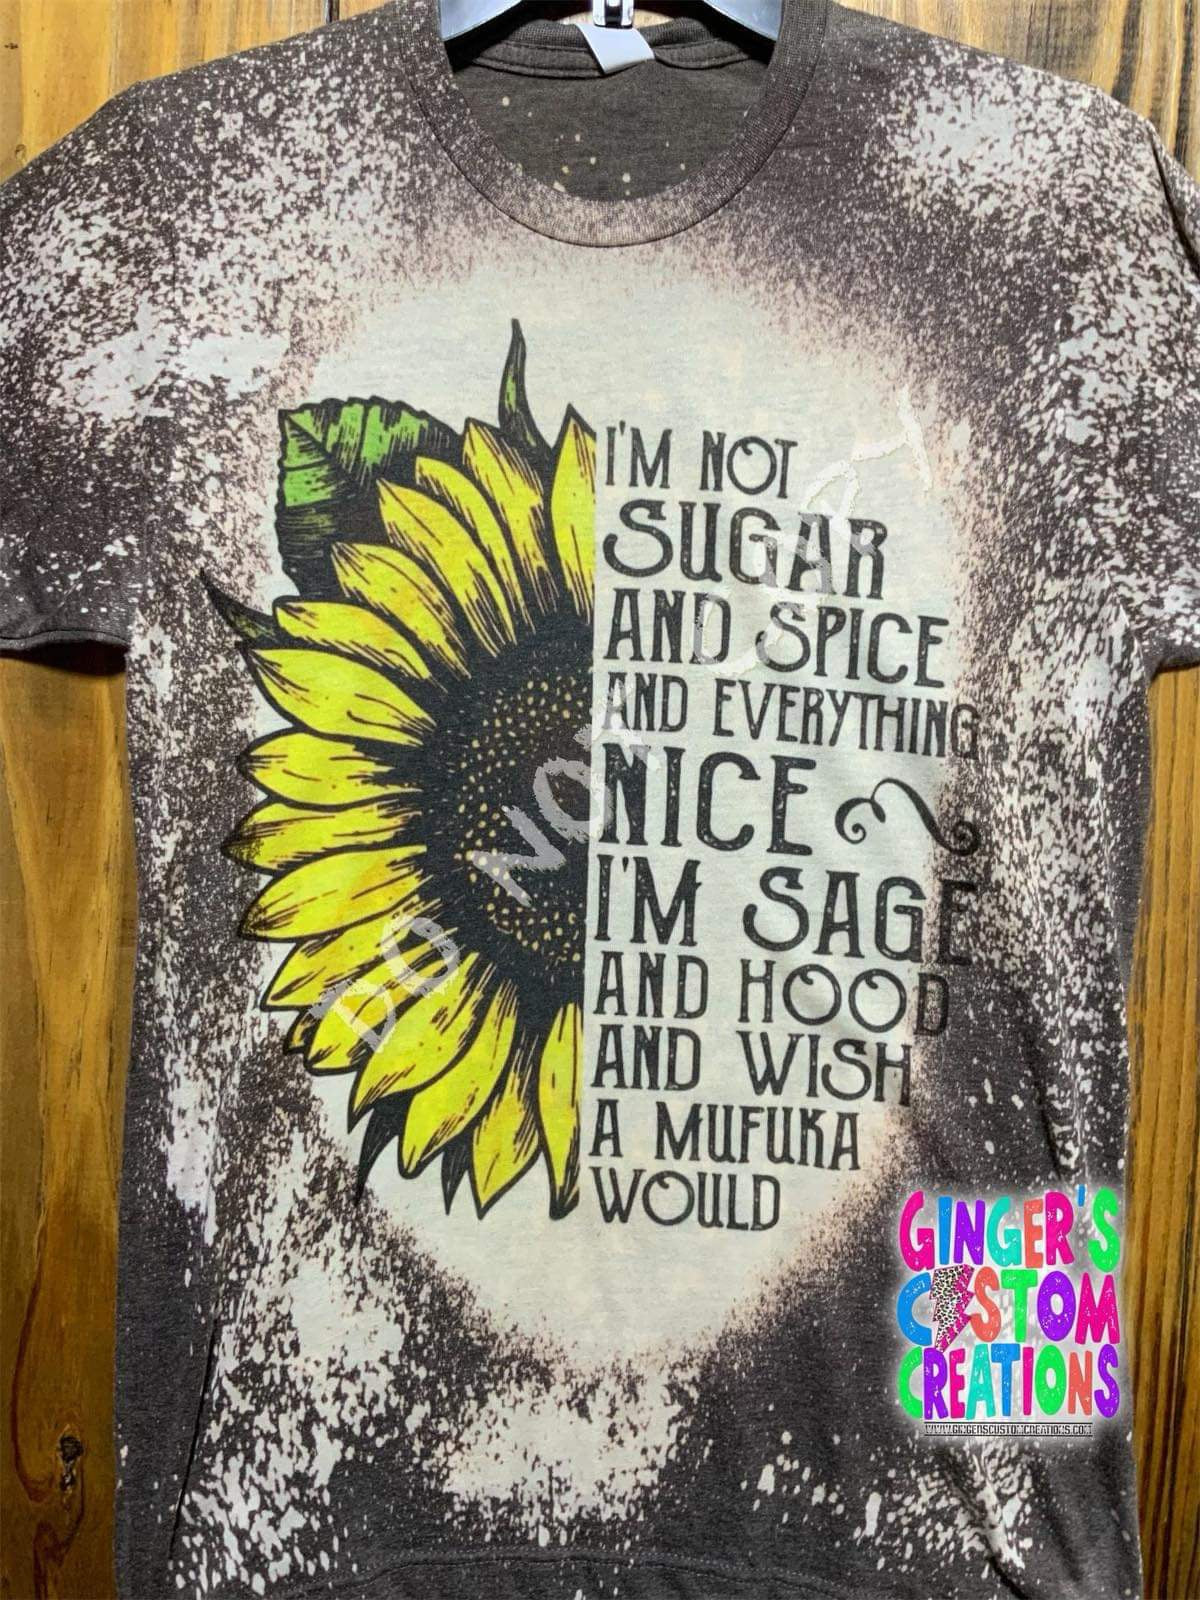 IM NOT SUGAR AND SPICE AND EVERYTHING NICE BLEACHED SHIRT